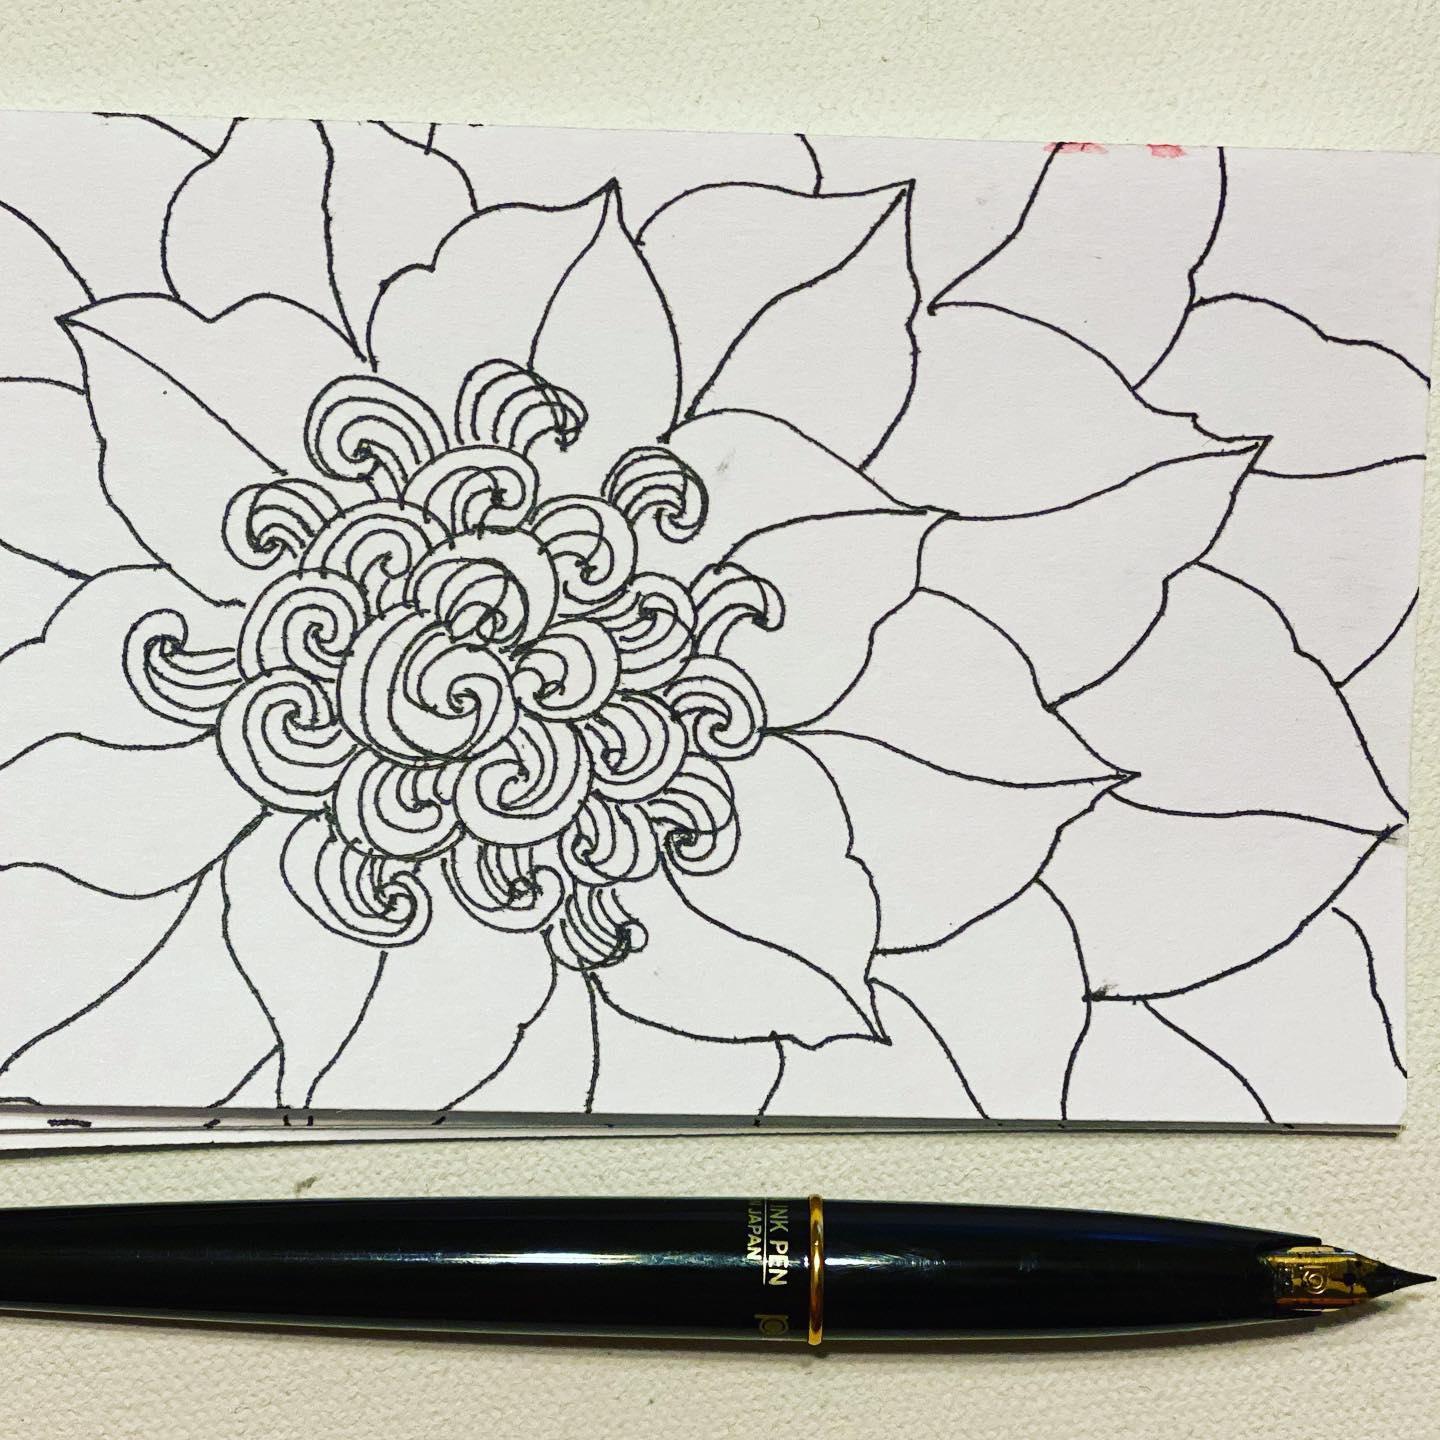 Doodling helps me unwind. What’s your tool?